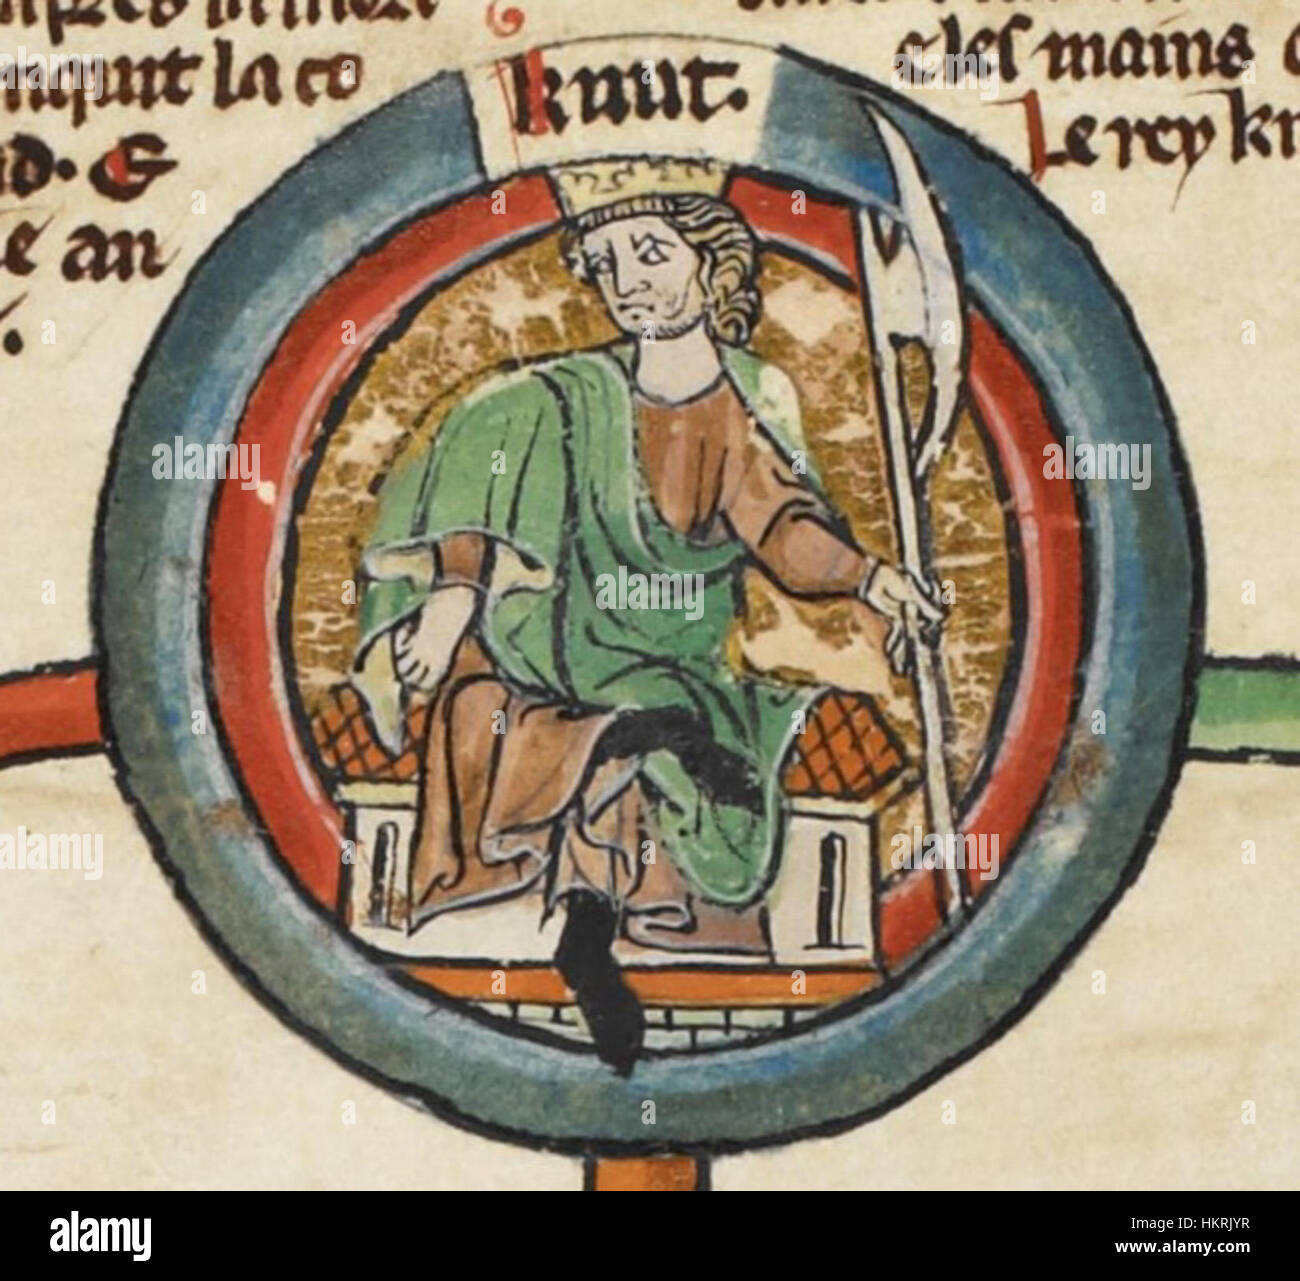 Royals in History: Cnut Sweynsson (990-1035): The Great Medieval King Who  Conquered England, Denmark and Sweden.